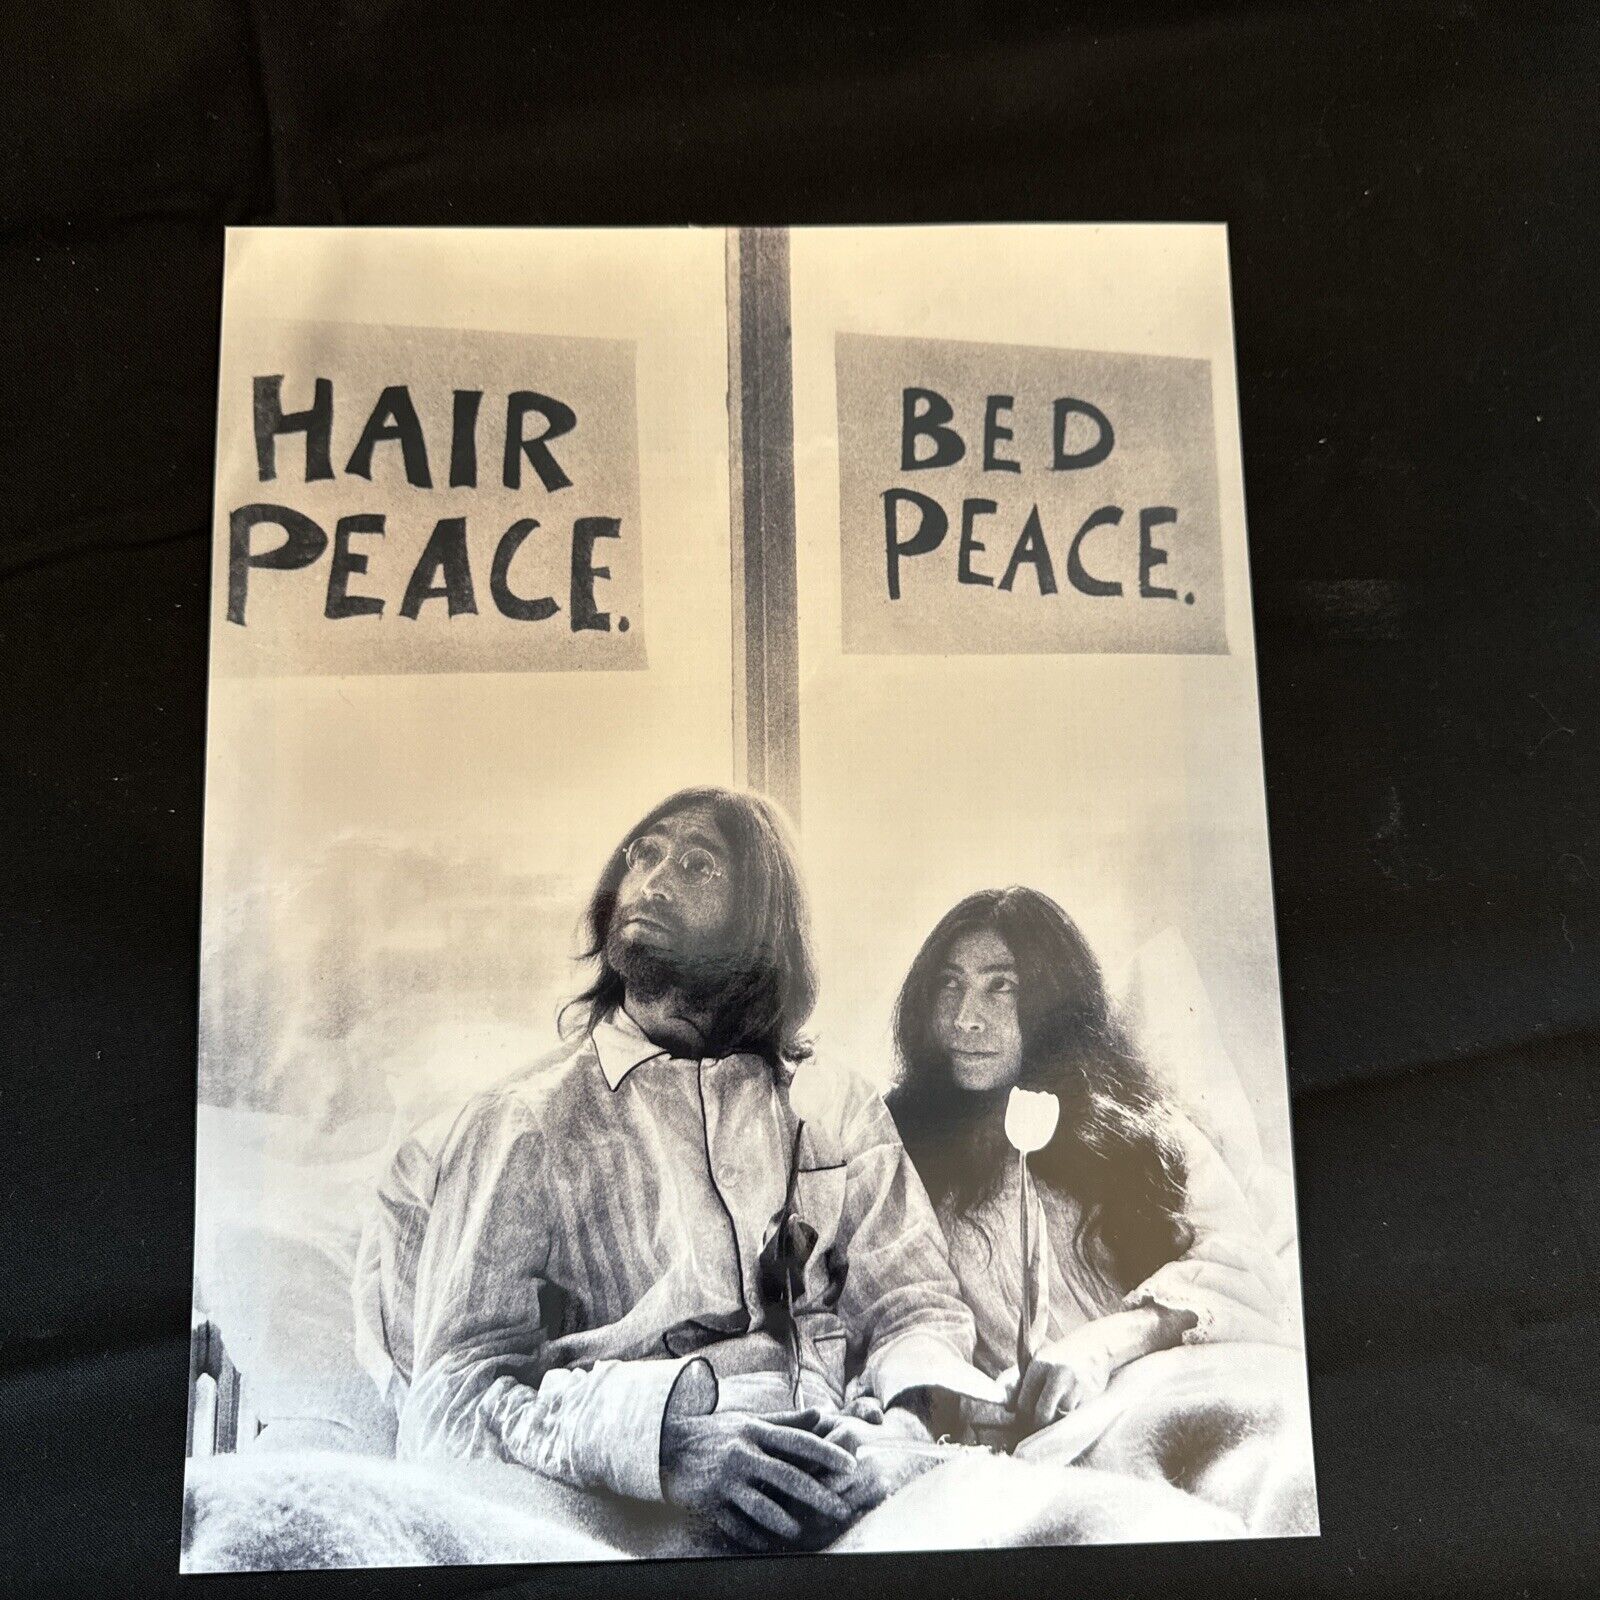 Beds-In For Peace 1969 - John Lennon Yoko Ono Print On Fujicolor Crystal Archive